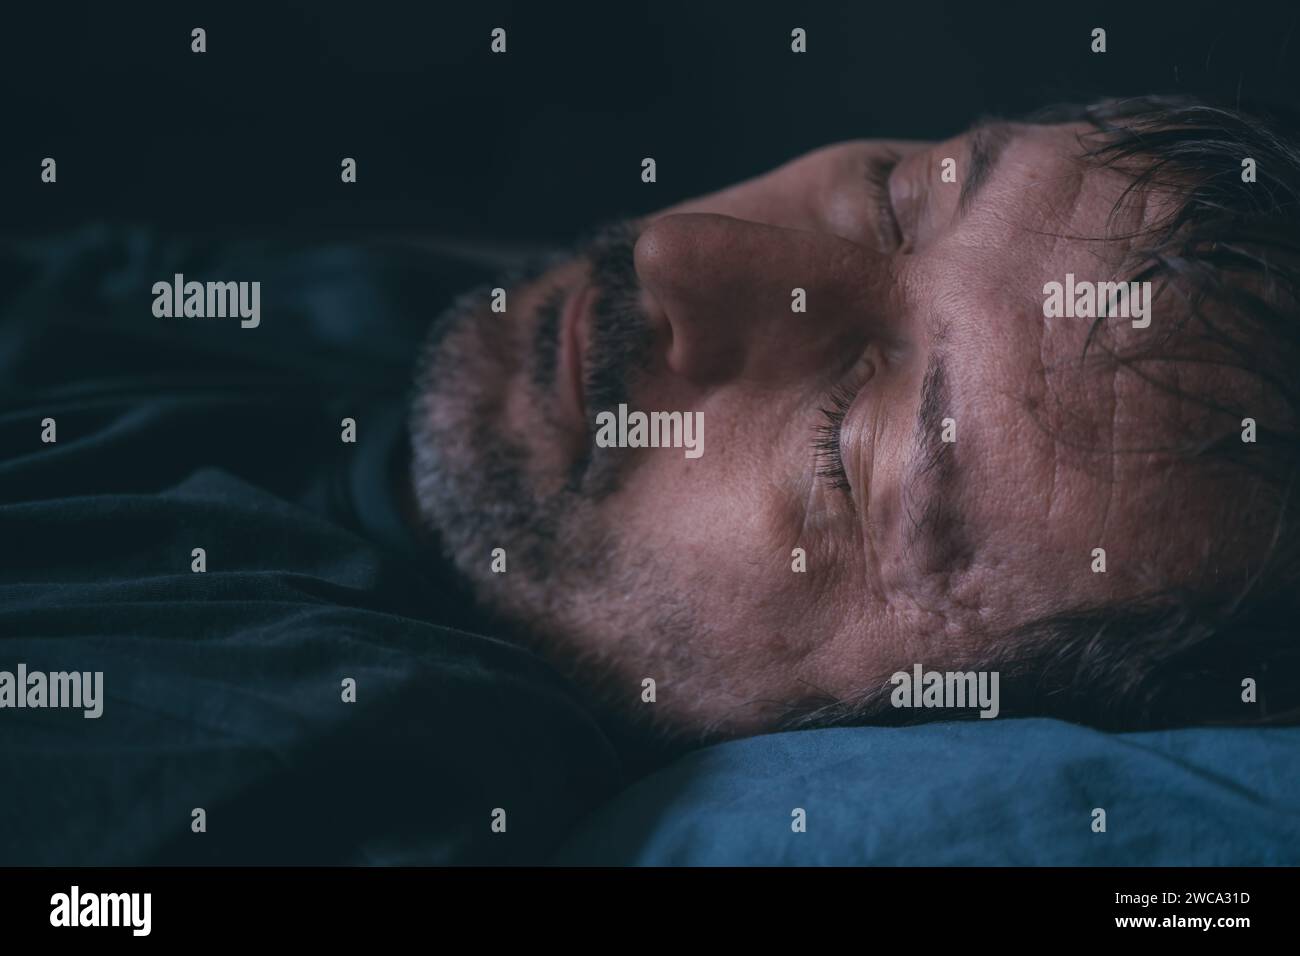 Man sleeping in bed, close up of face, selective focus Stock Photo